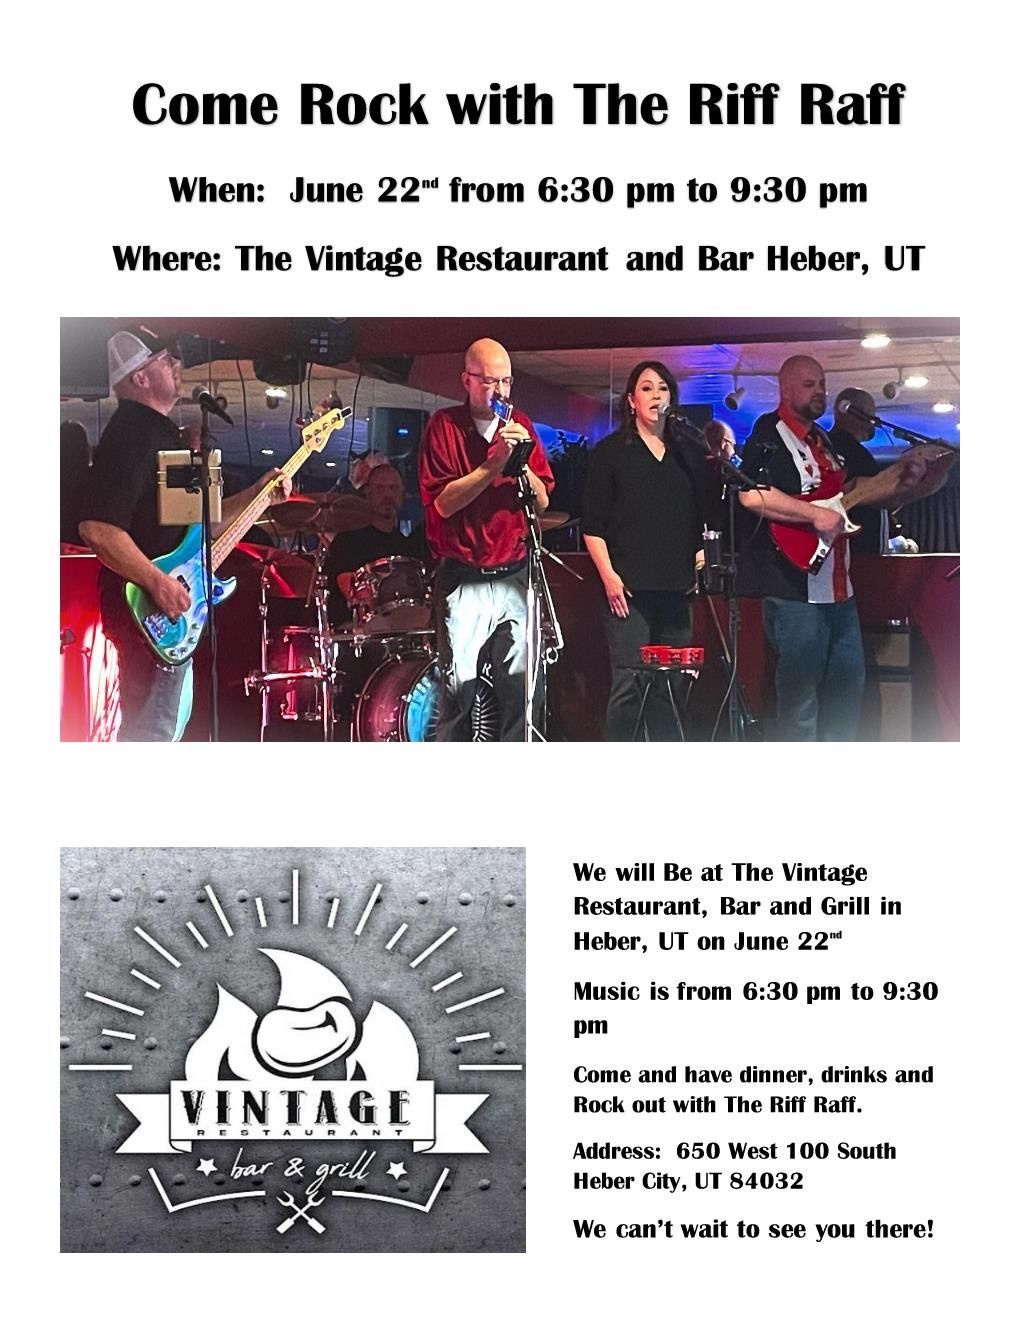 Live Music at The Vintage Restaurant, Bar and Grill